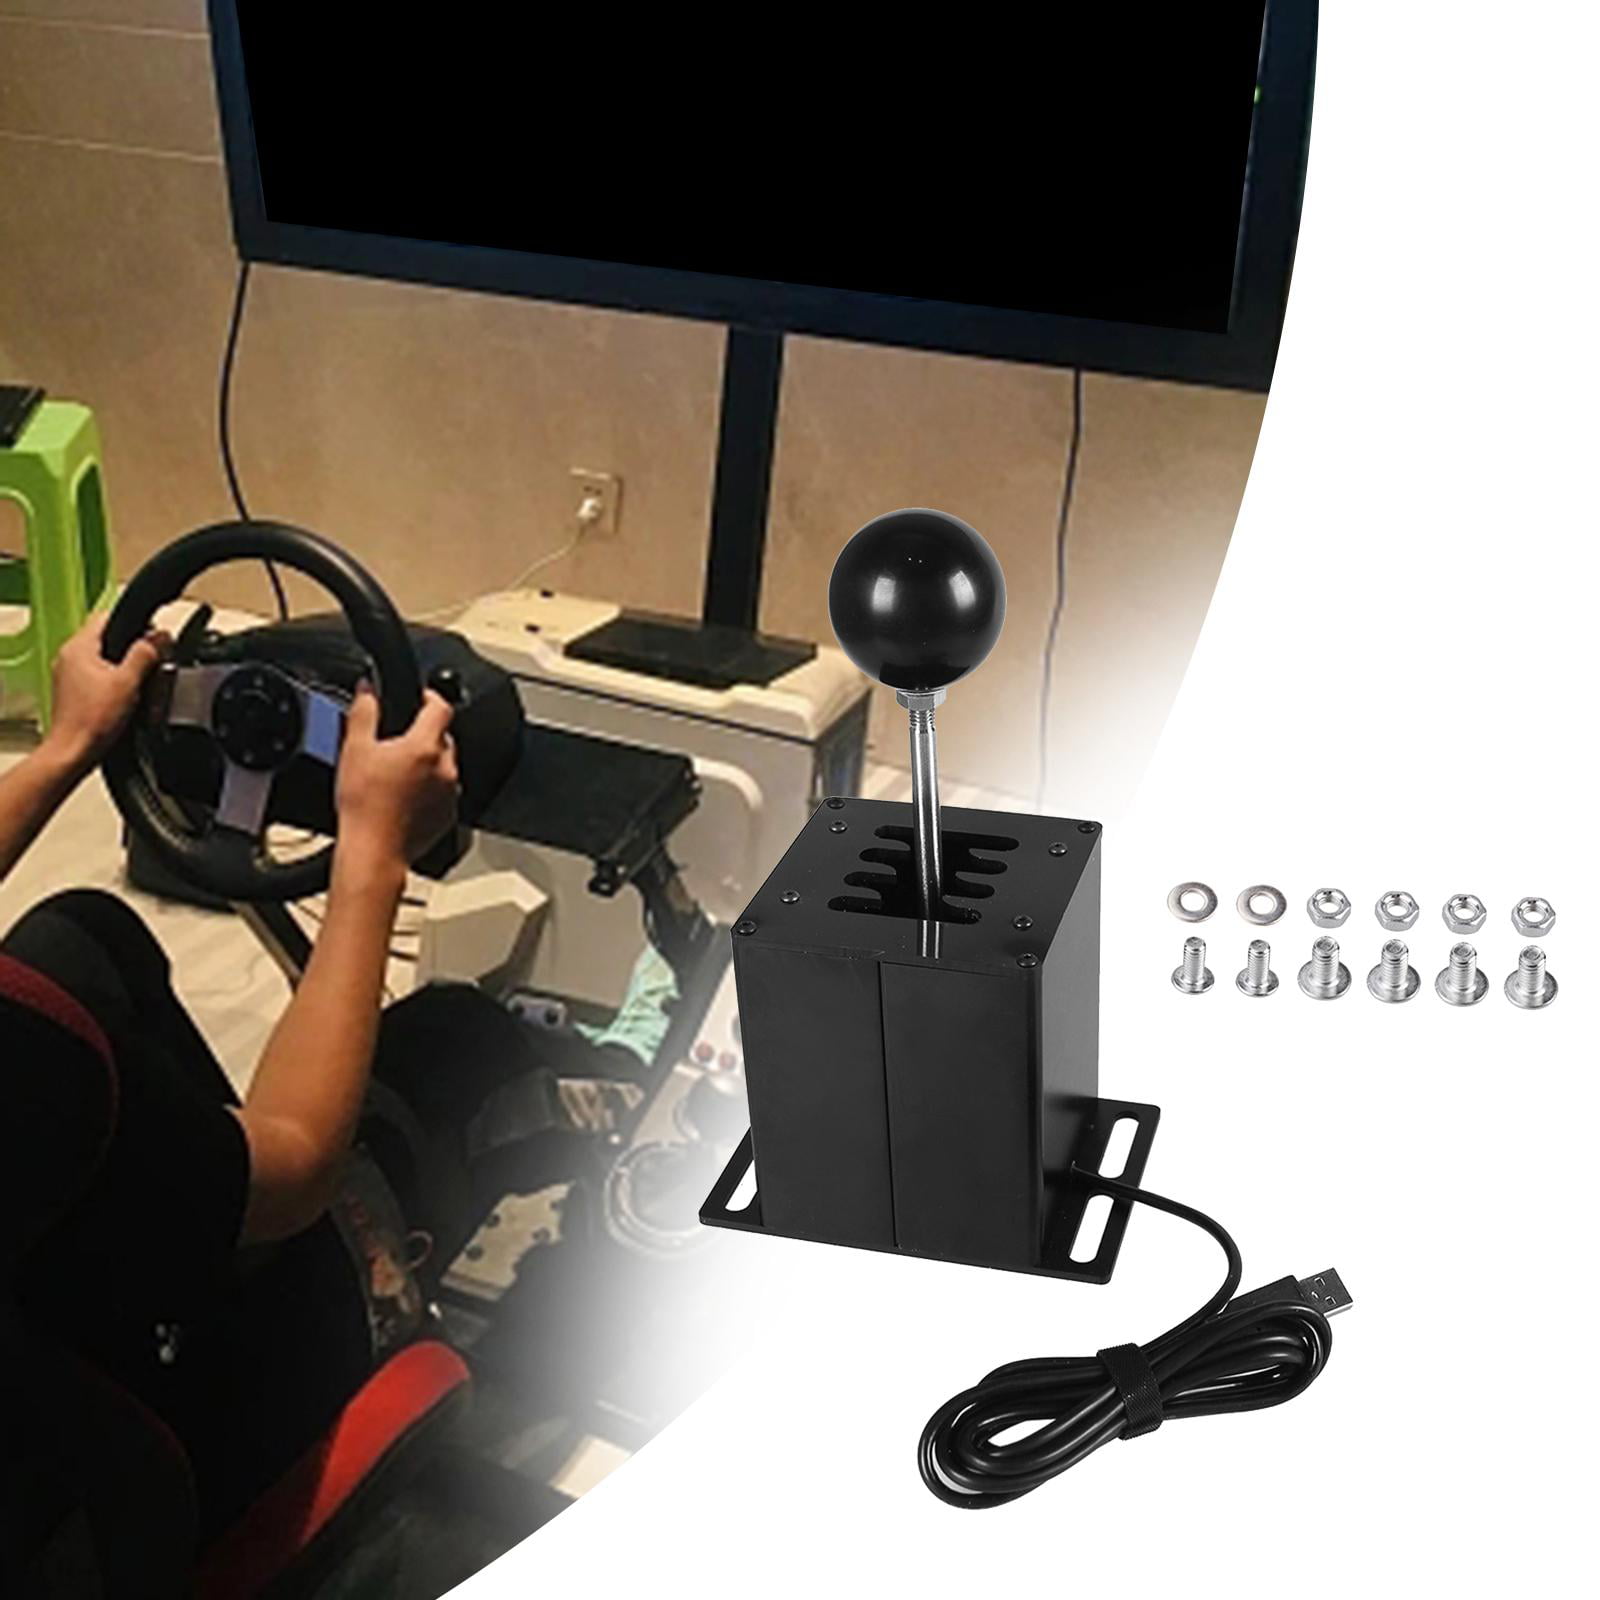 H Gear Shifter Steering Wheel Simulator, Sim Games ,Easy to Install ,Replaces  USB Shifter USB Simulator Shifter for T300 G25 8 Gear black 